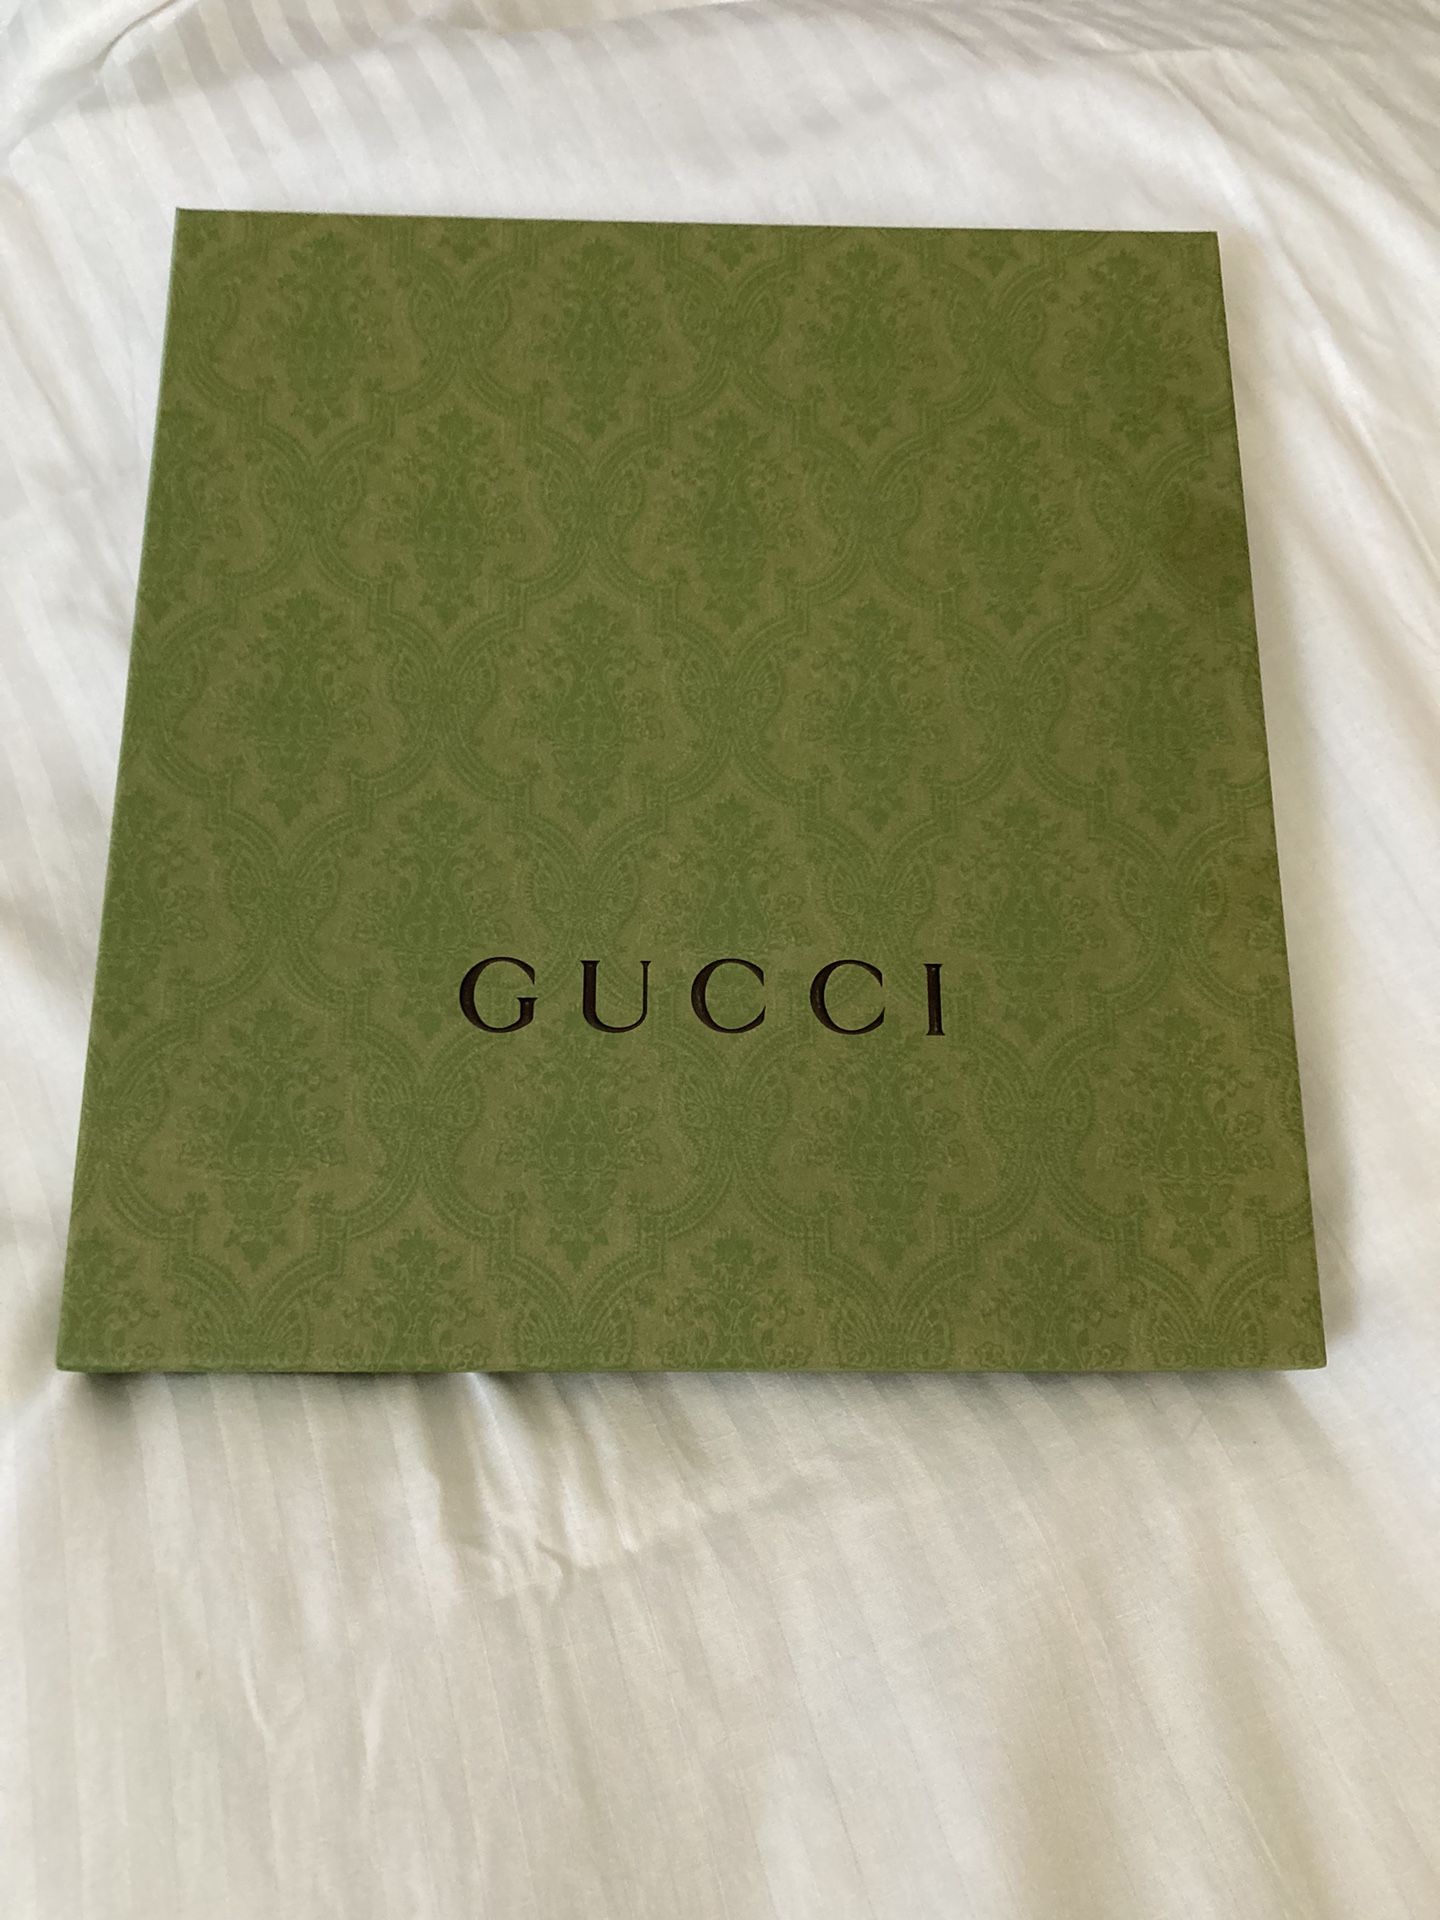 Gucci Scarf Box Only Like New 